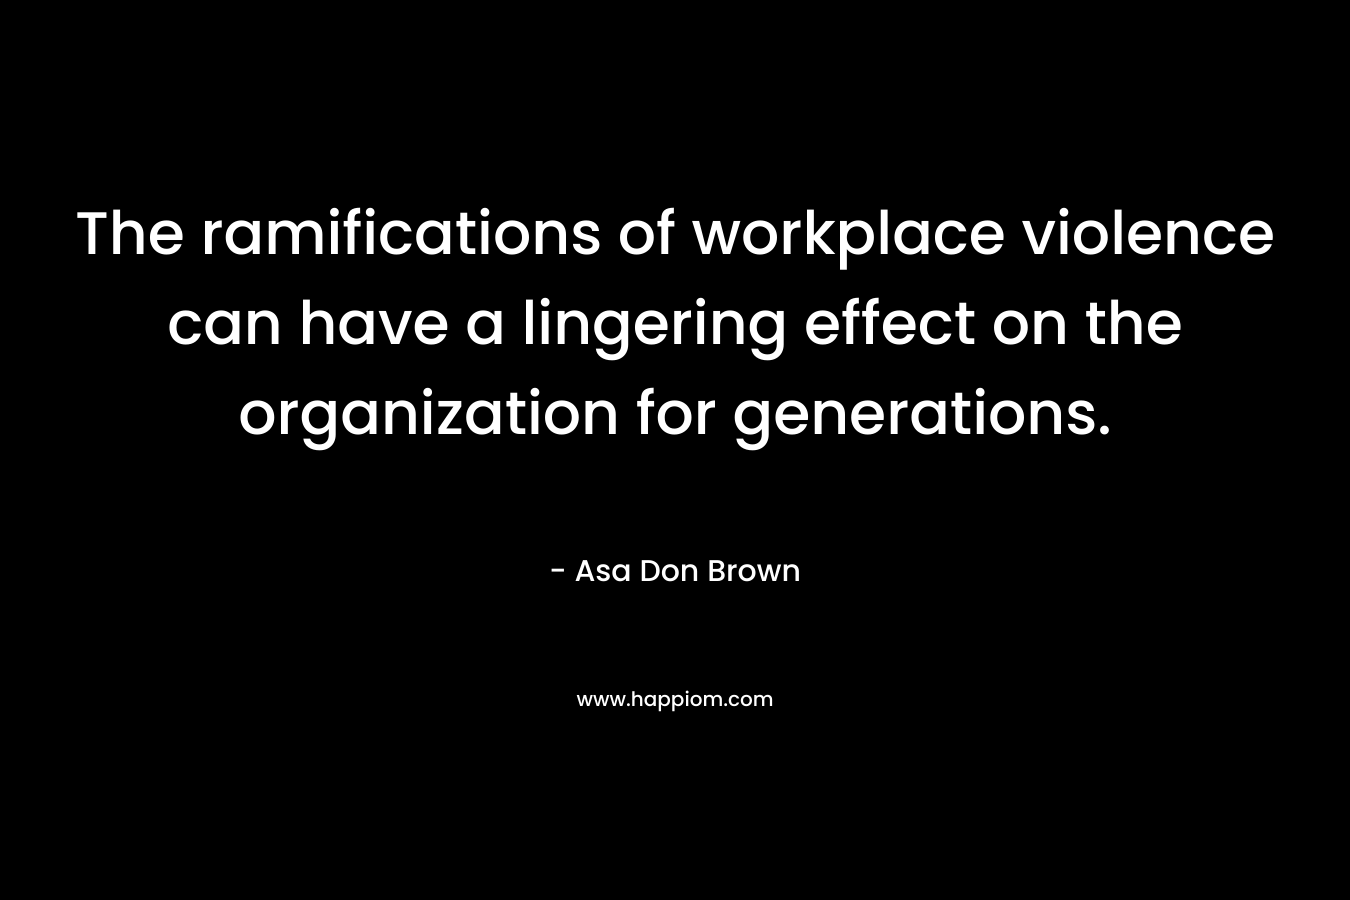 The ramifications of workplace violence can have a lingering effect on the organization for generations. – Asa Don Brown